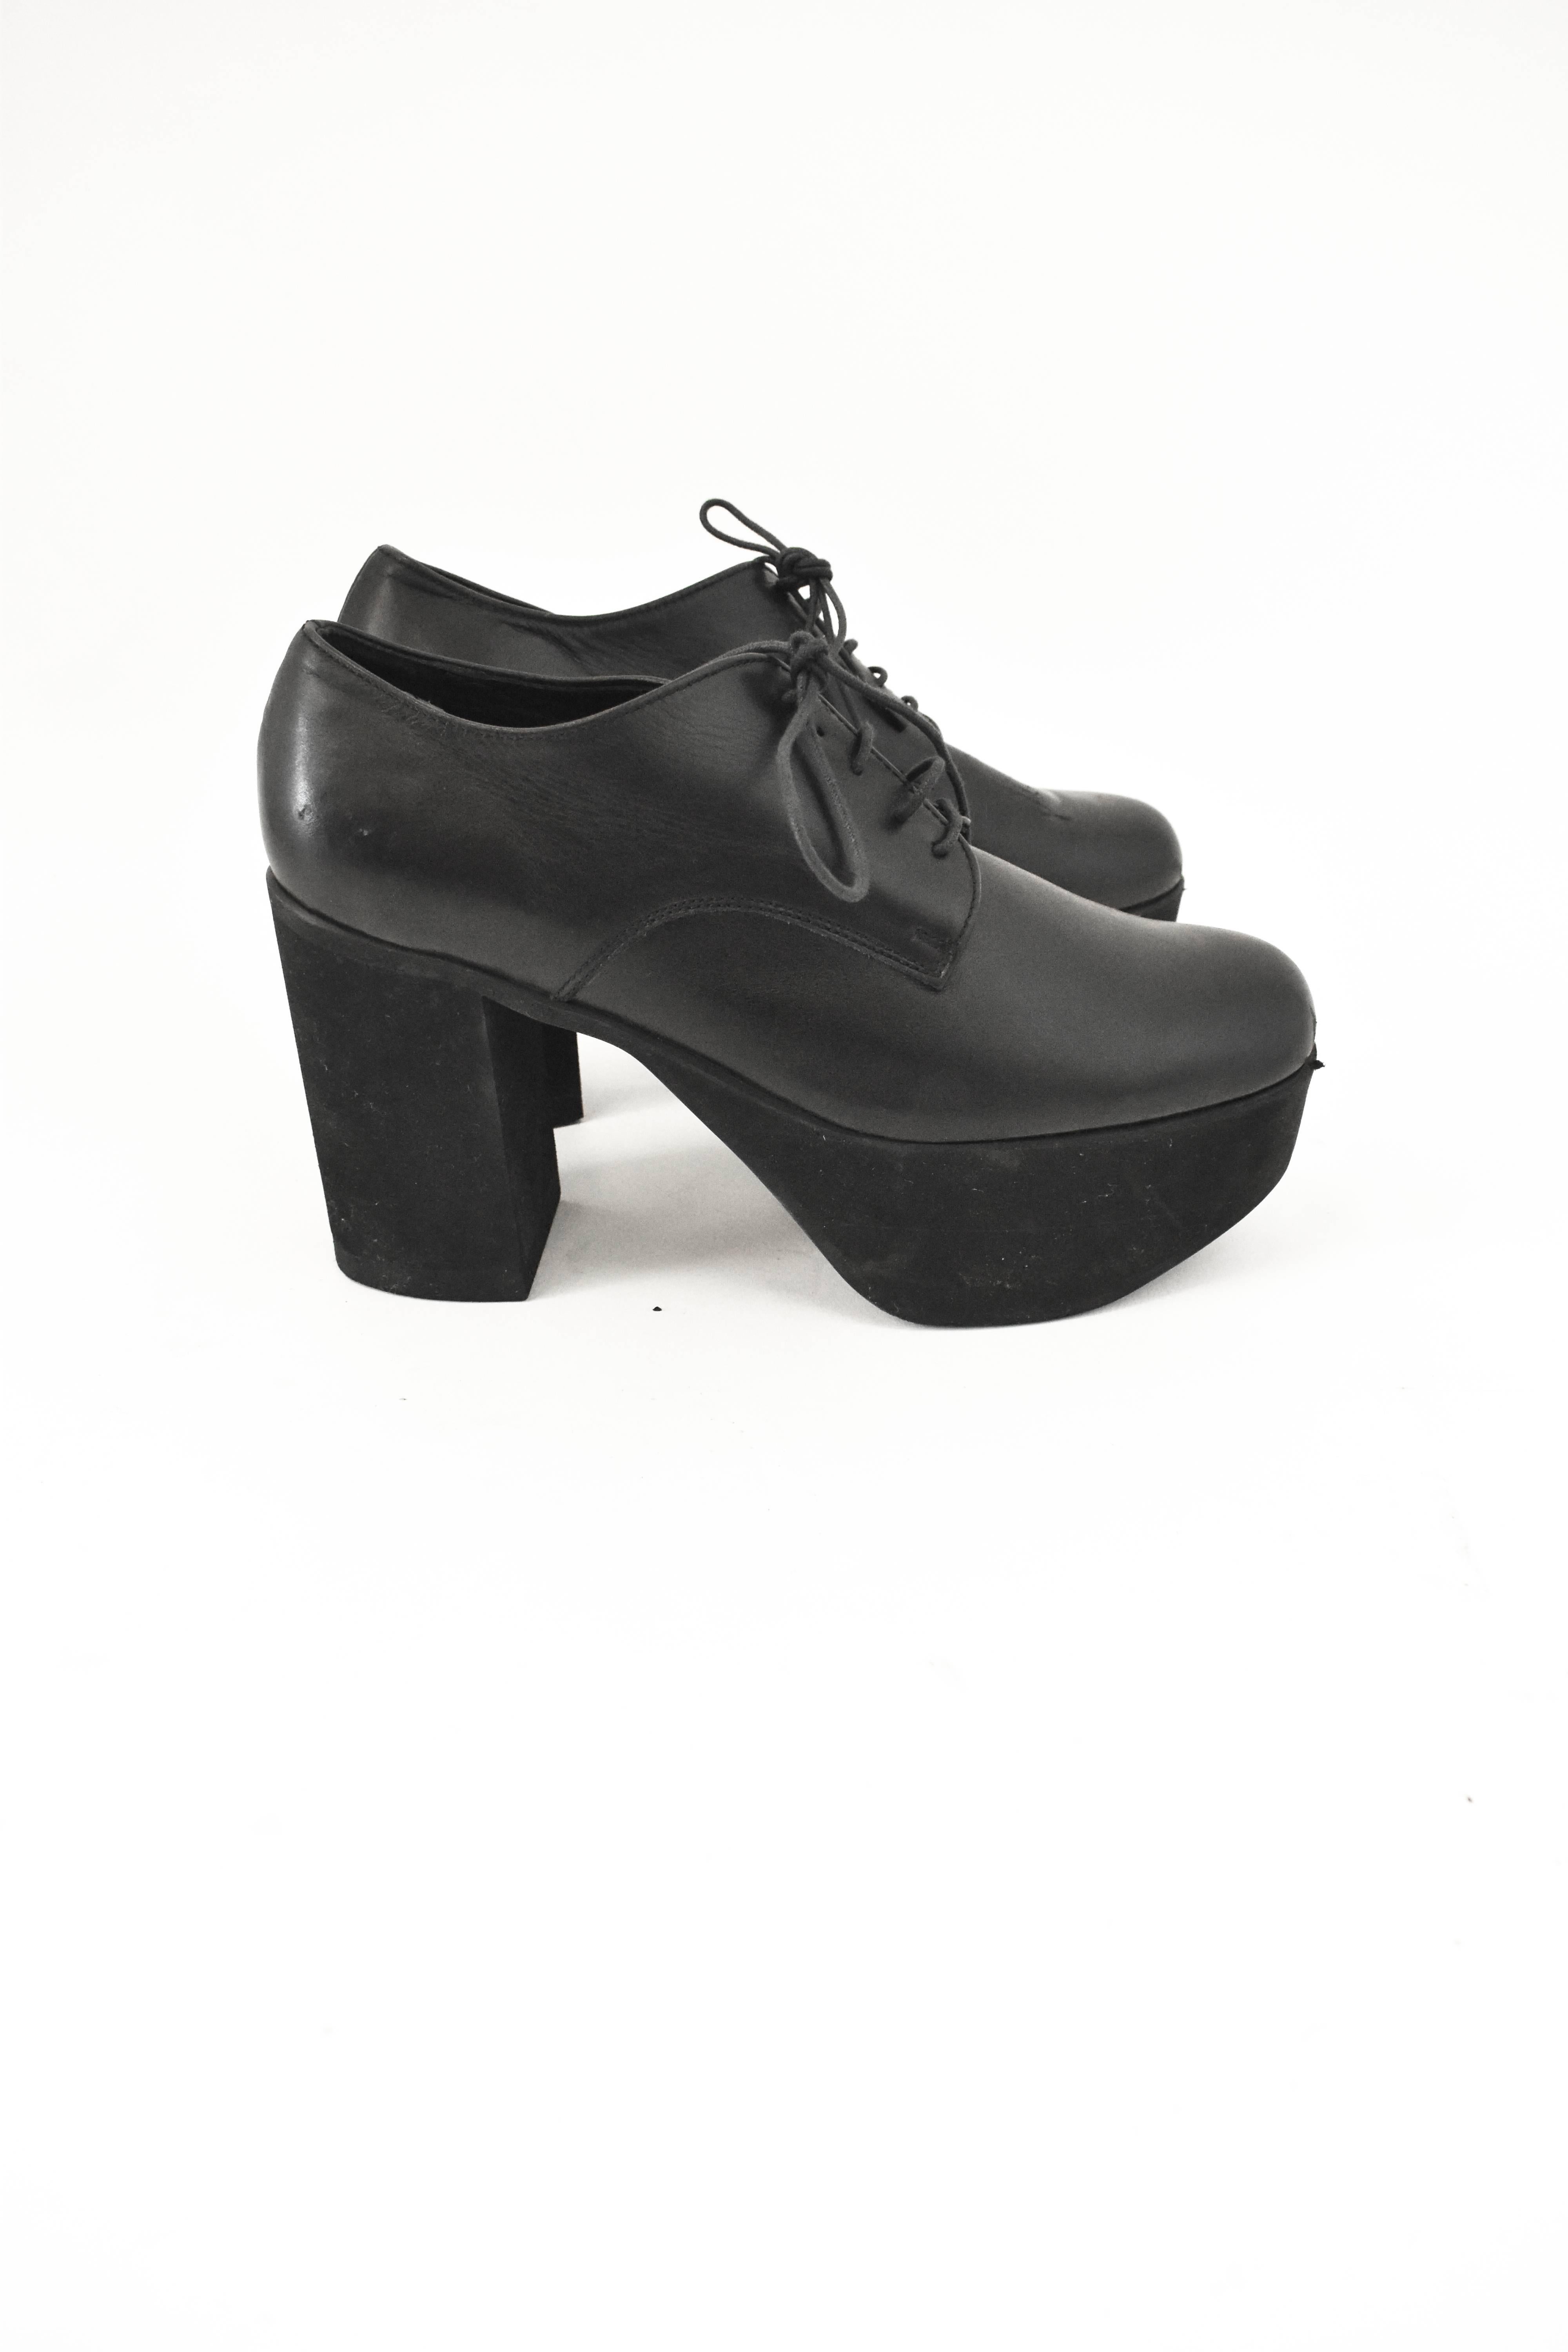 A pair of contemporary chunky black platform shoes from Yohji Yamamoto. The shoes are made from a soft black leather and lace-up fastening with a chunky 2 inch rubber platform sole and 4.5 inch heels. The shoes have been worn but are in good used